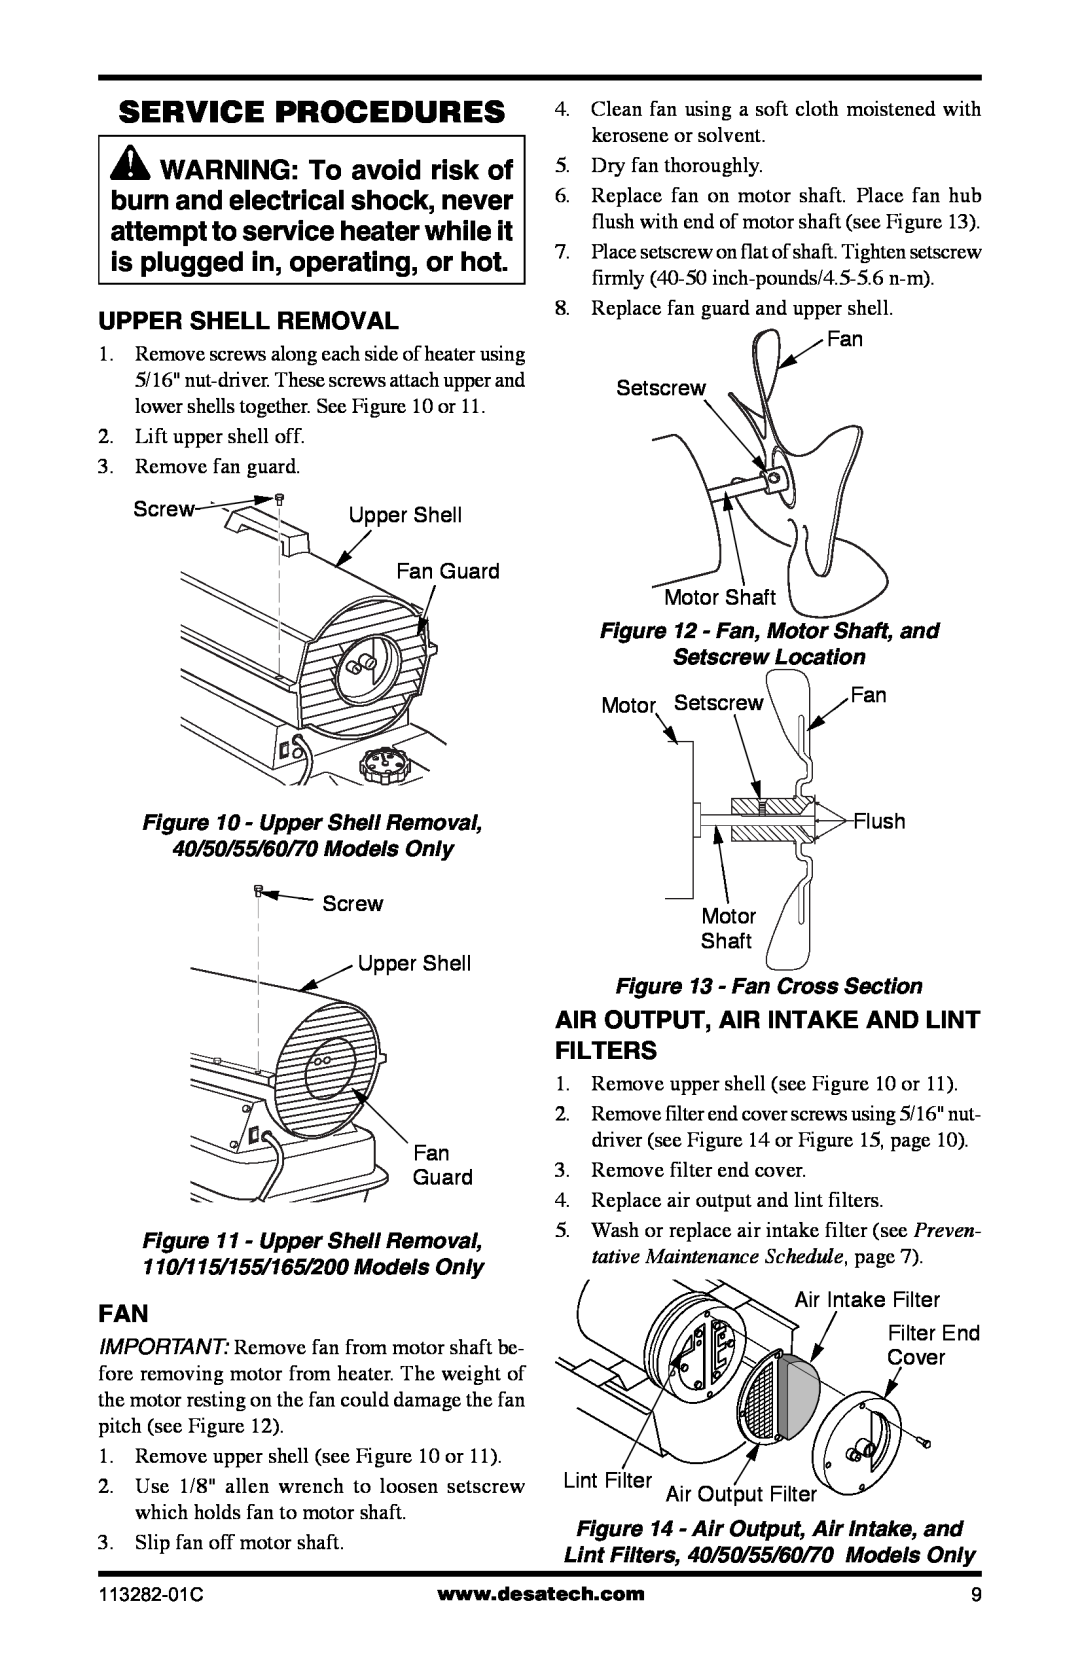 Desa BTU/HR Service Procedures, Upper Shell Removal, Air Output, Air Intake And Lint Filters, Fan, Motor Shaft, and 